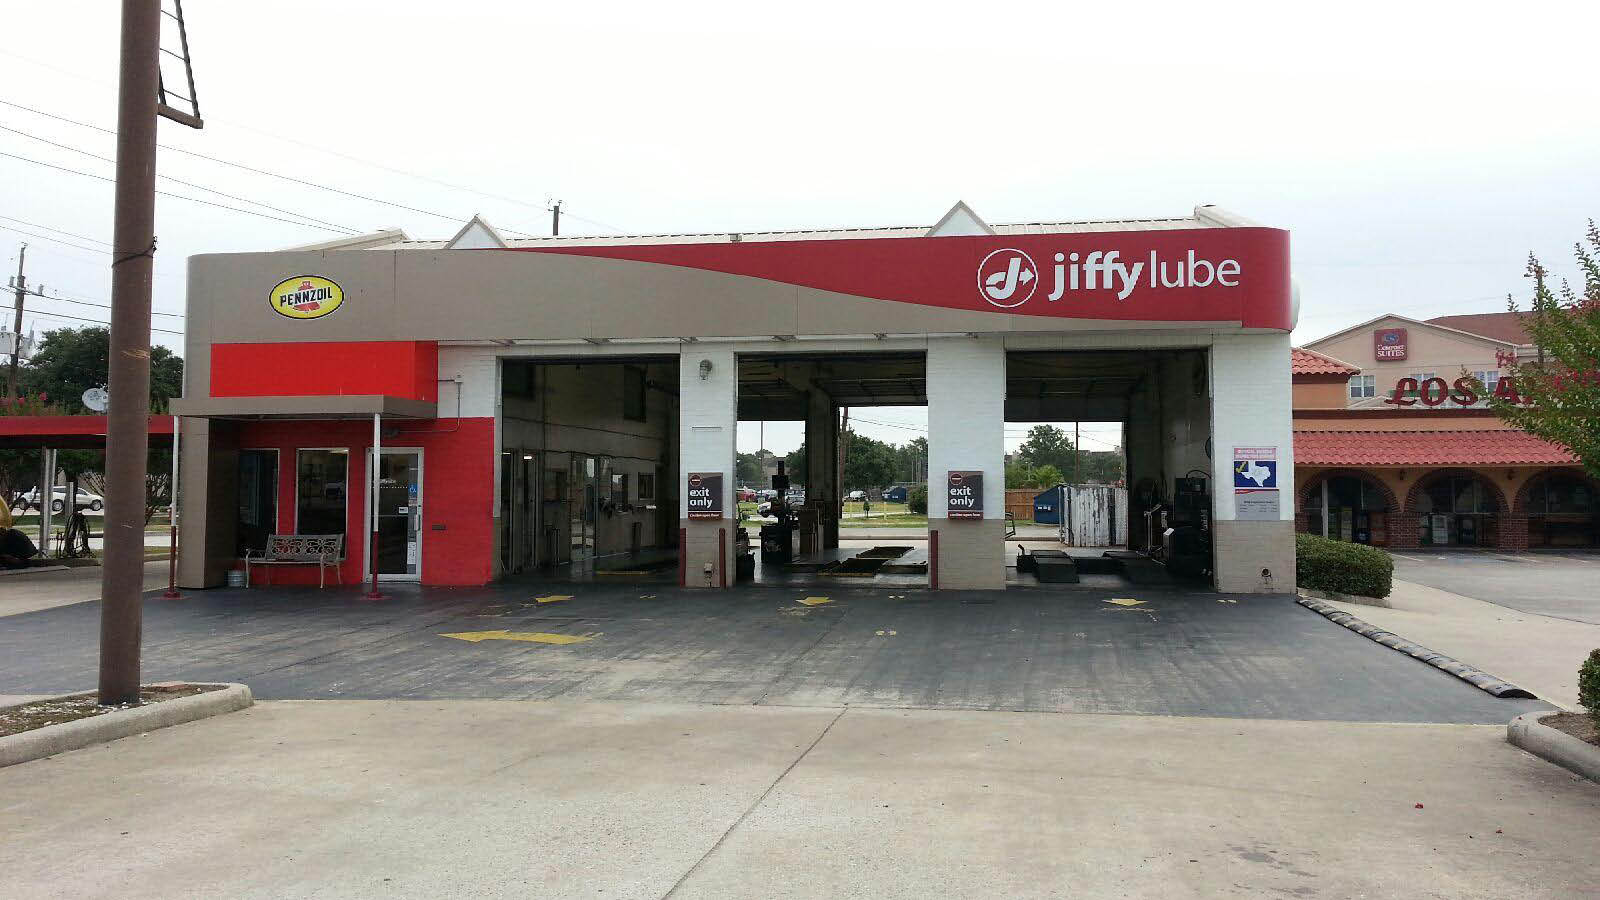 tomball-jiffy-lube-oil-change-coupons-auto-service